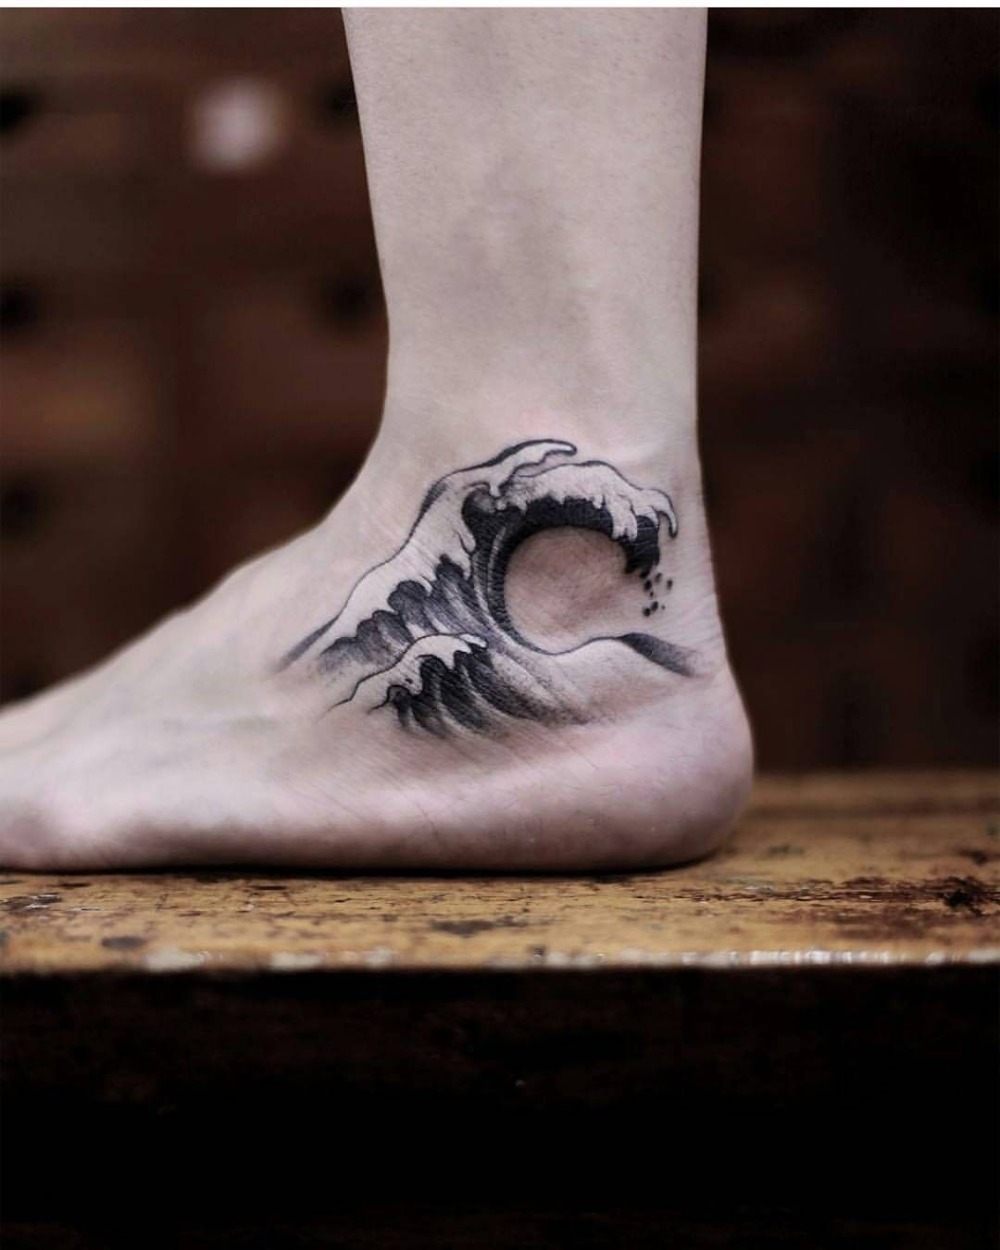 wave tattoo design in the foot tattoo for men